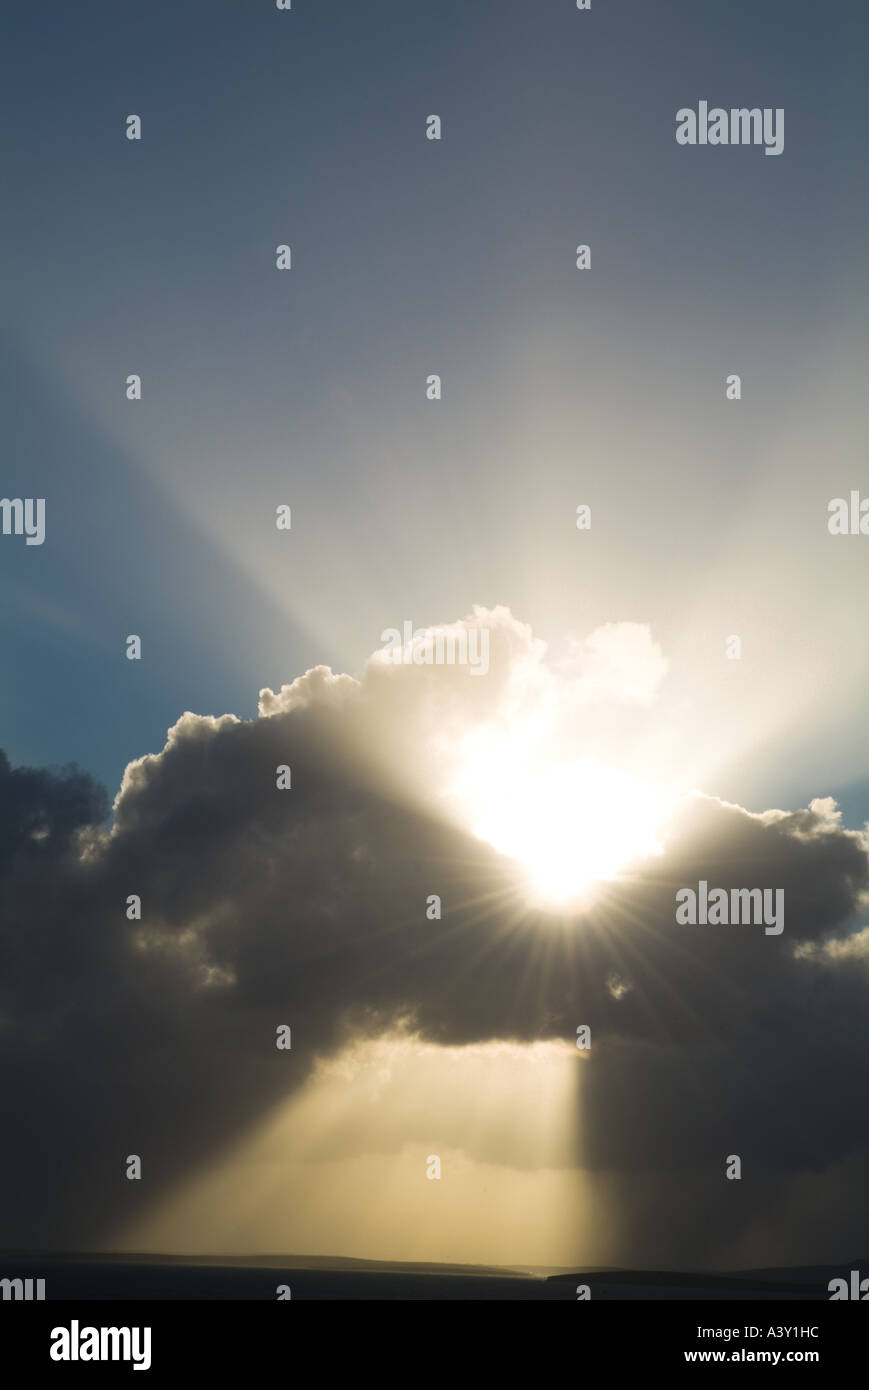 dh  CLOUDS BACKGROUND Black grey storm clouds with ray of sunlight from white sun sky moody cloud silver lining sunbeam rays uk Stock Photo